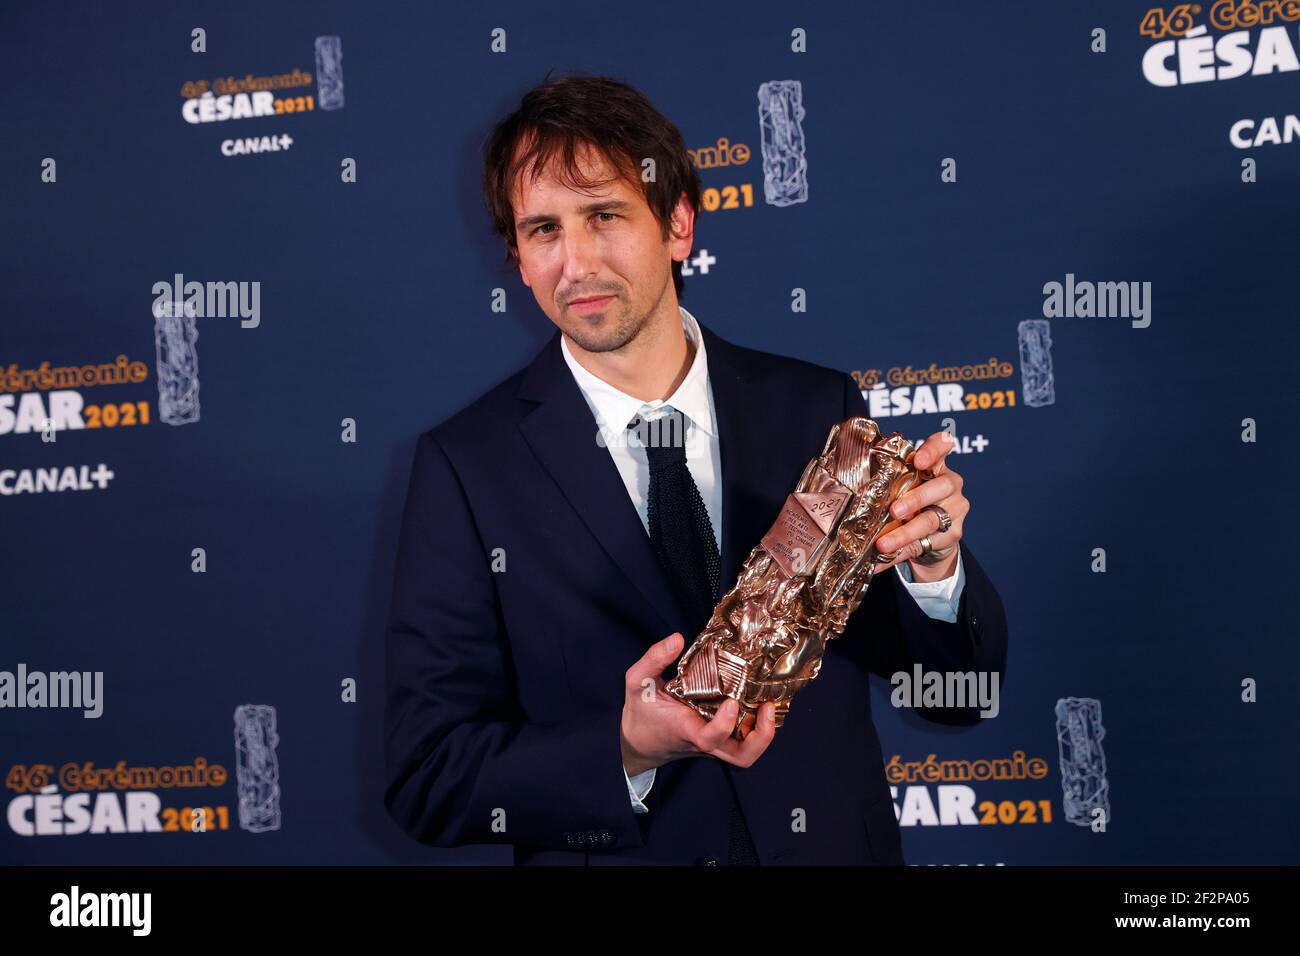 Director Stephane Demoustier poses during a photocall after receiving the  Best Adapted Screenplay Award for his film "La fille au bracelet" (The Girl  with a Bracelet) during the 46th Cesar Awards ceremony